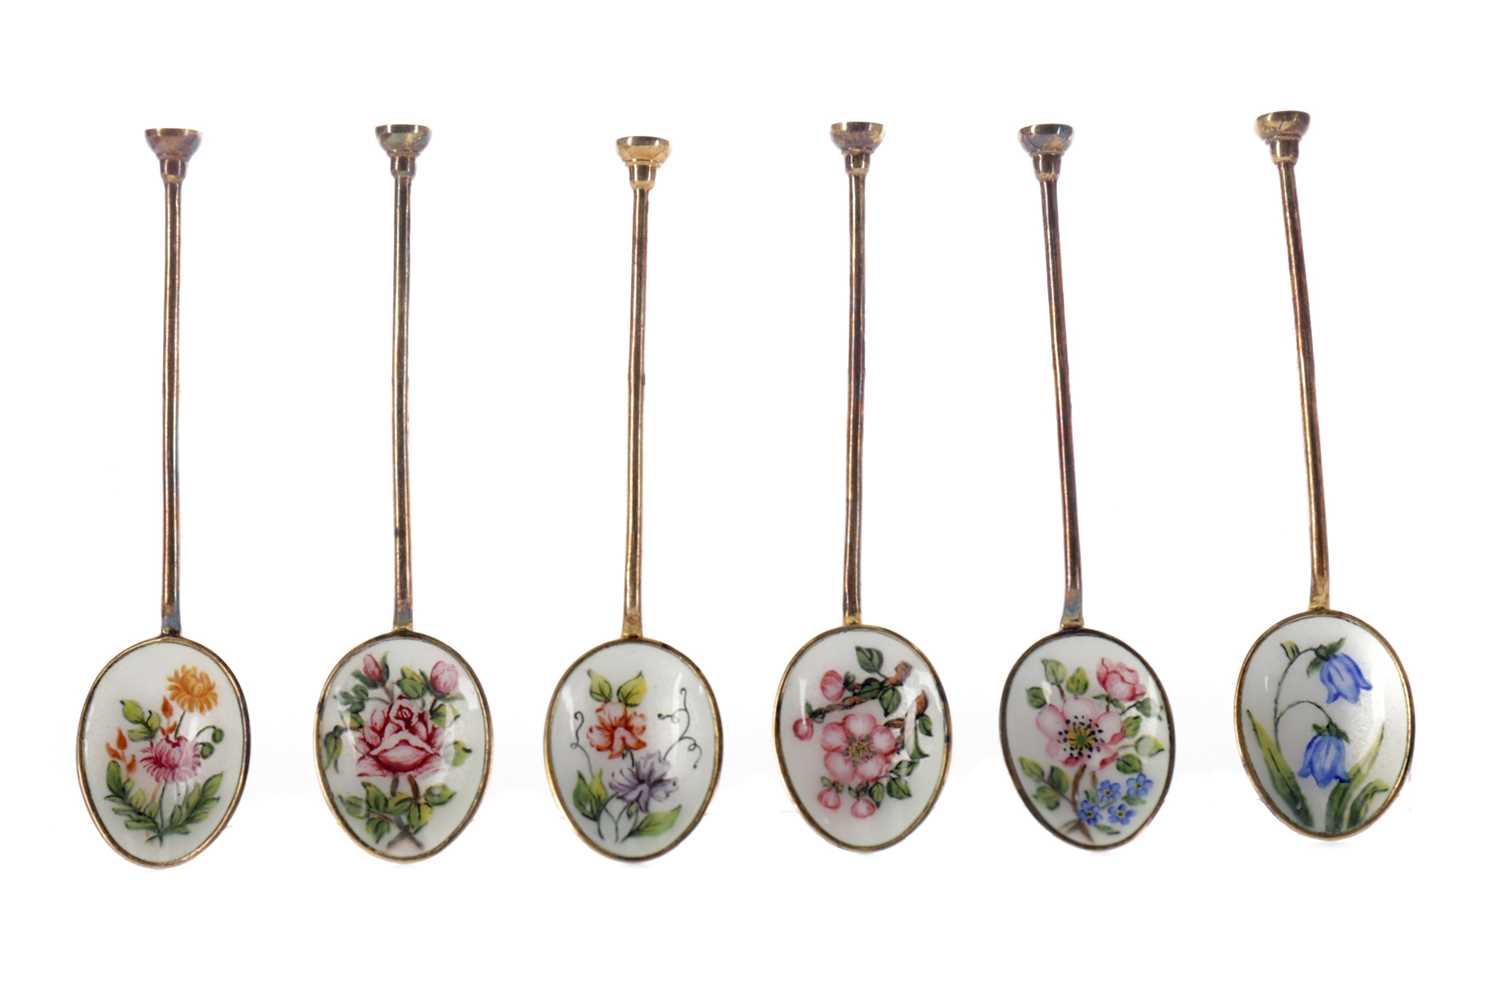 Lot 418 - A SET OF SIX SILVER GILT AND ENAMEL COFFEE SPOONS